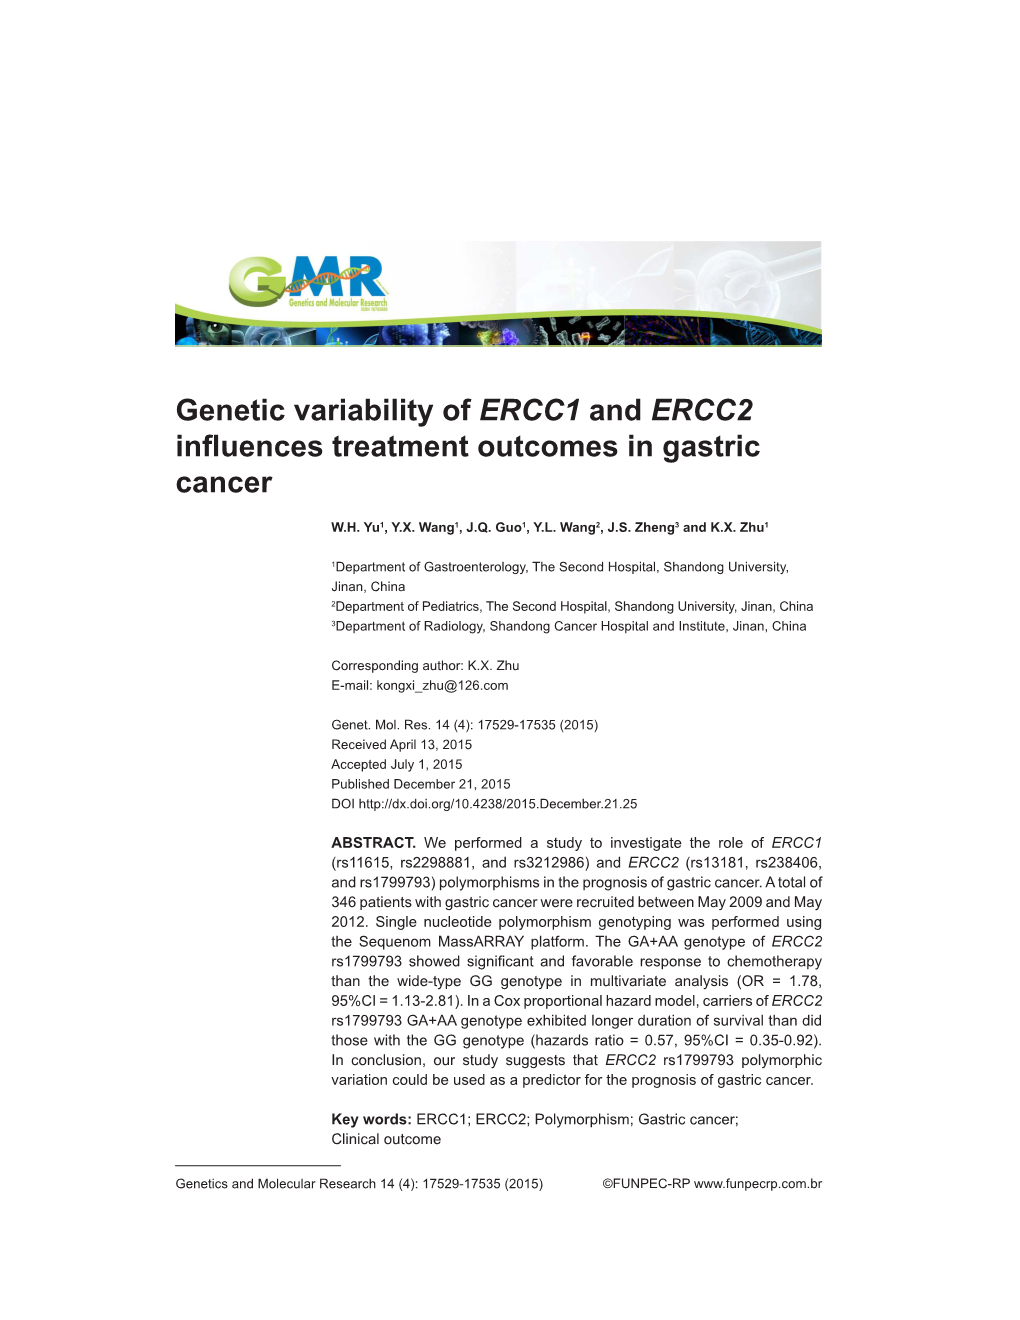 Genetic Variability of ERCC1 and ERCC2 Influences Treatment Outcomes in Gastric Cancer